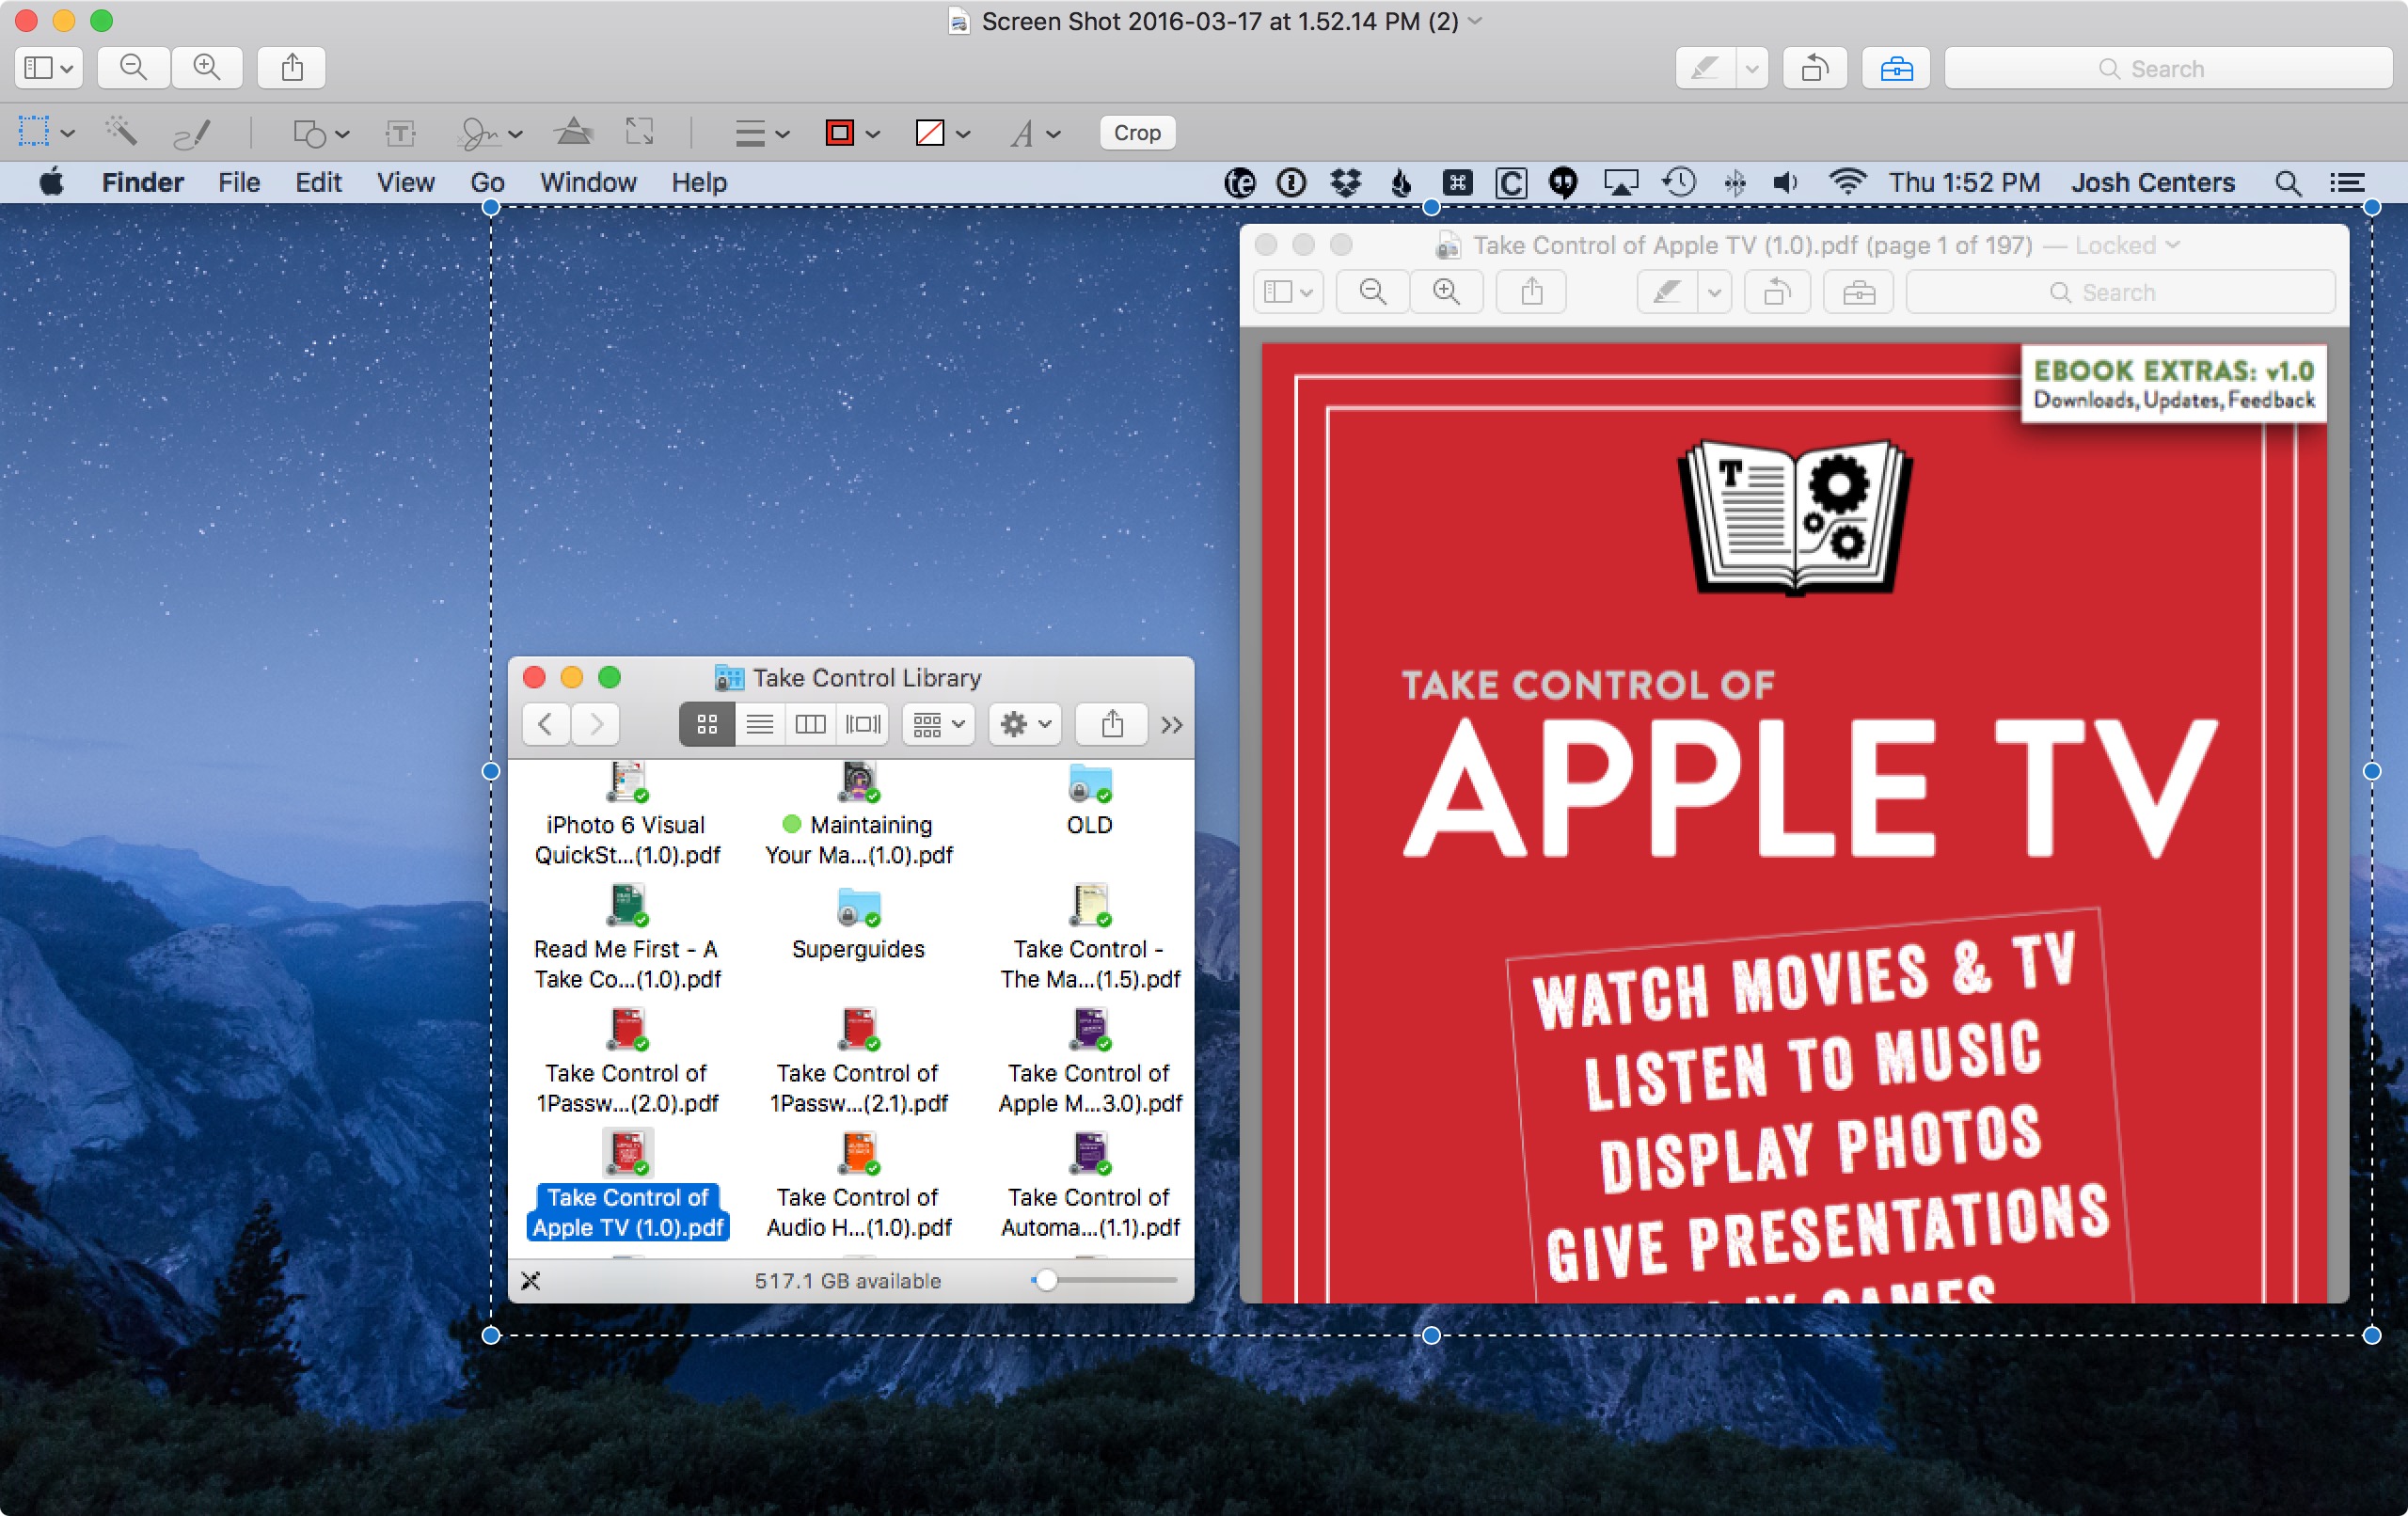 short cut for text box on preview in mac